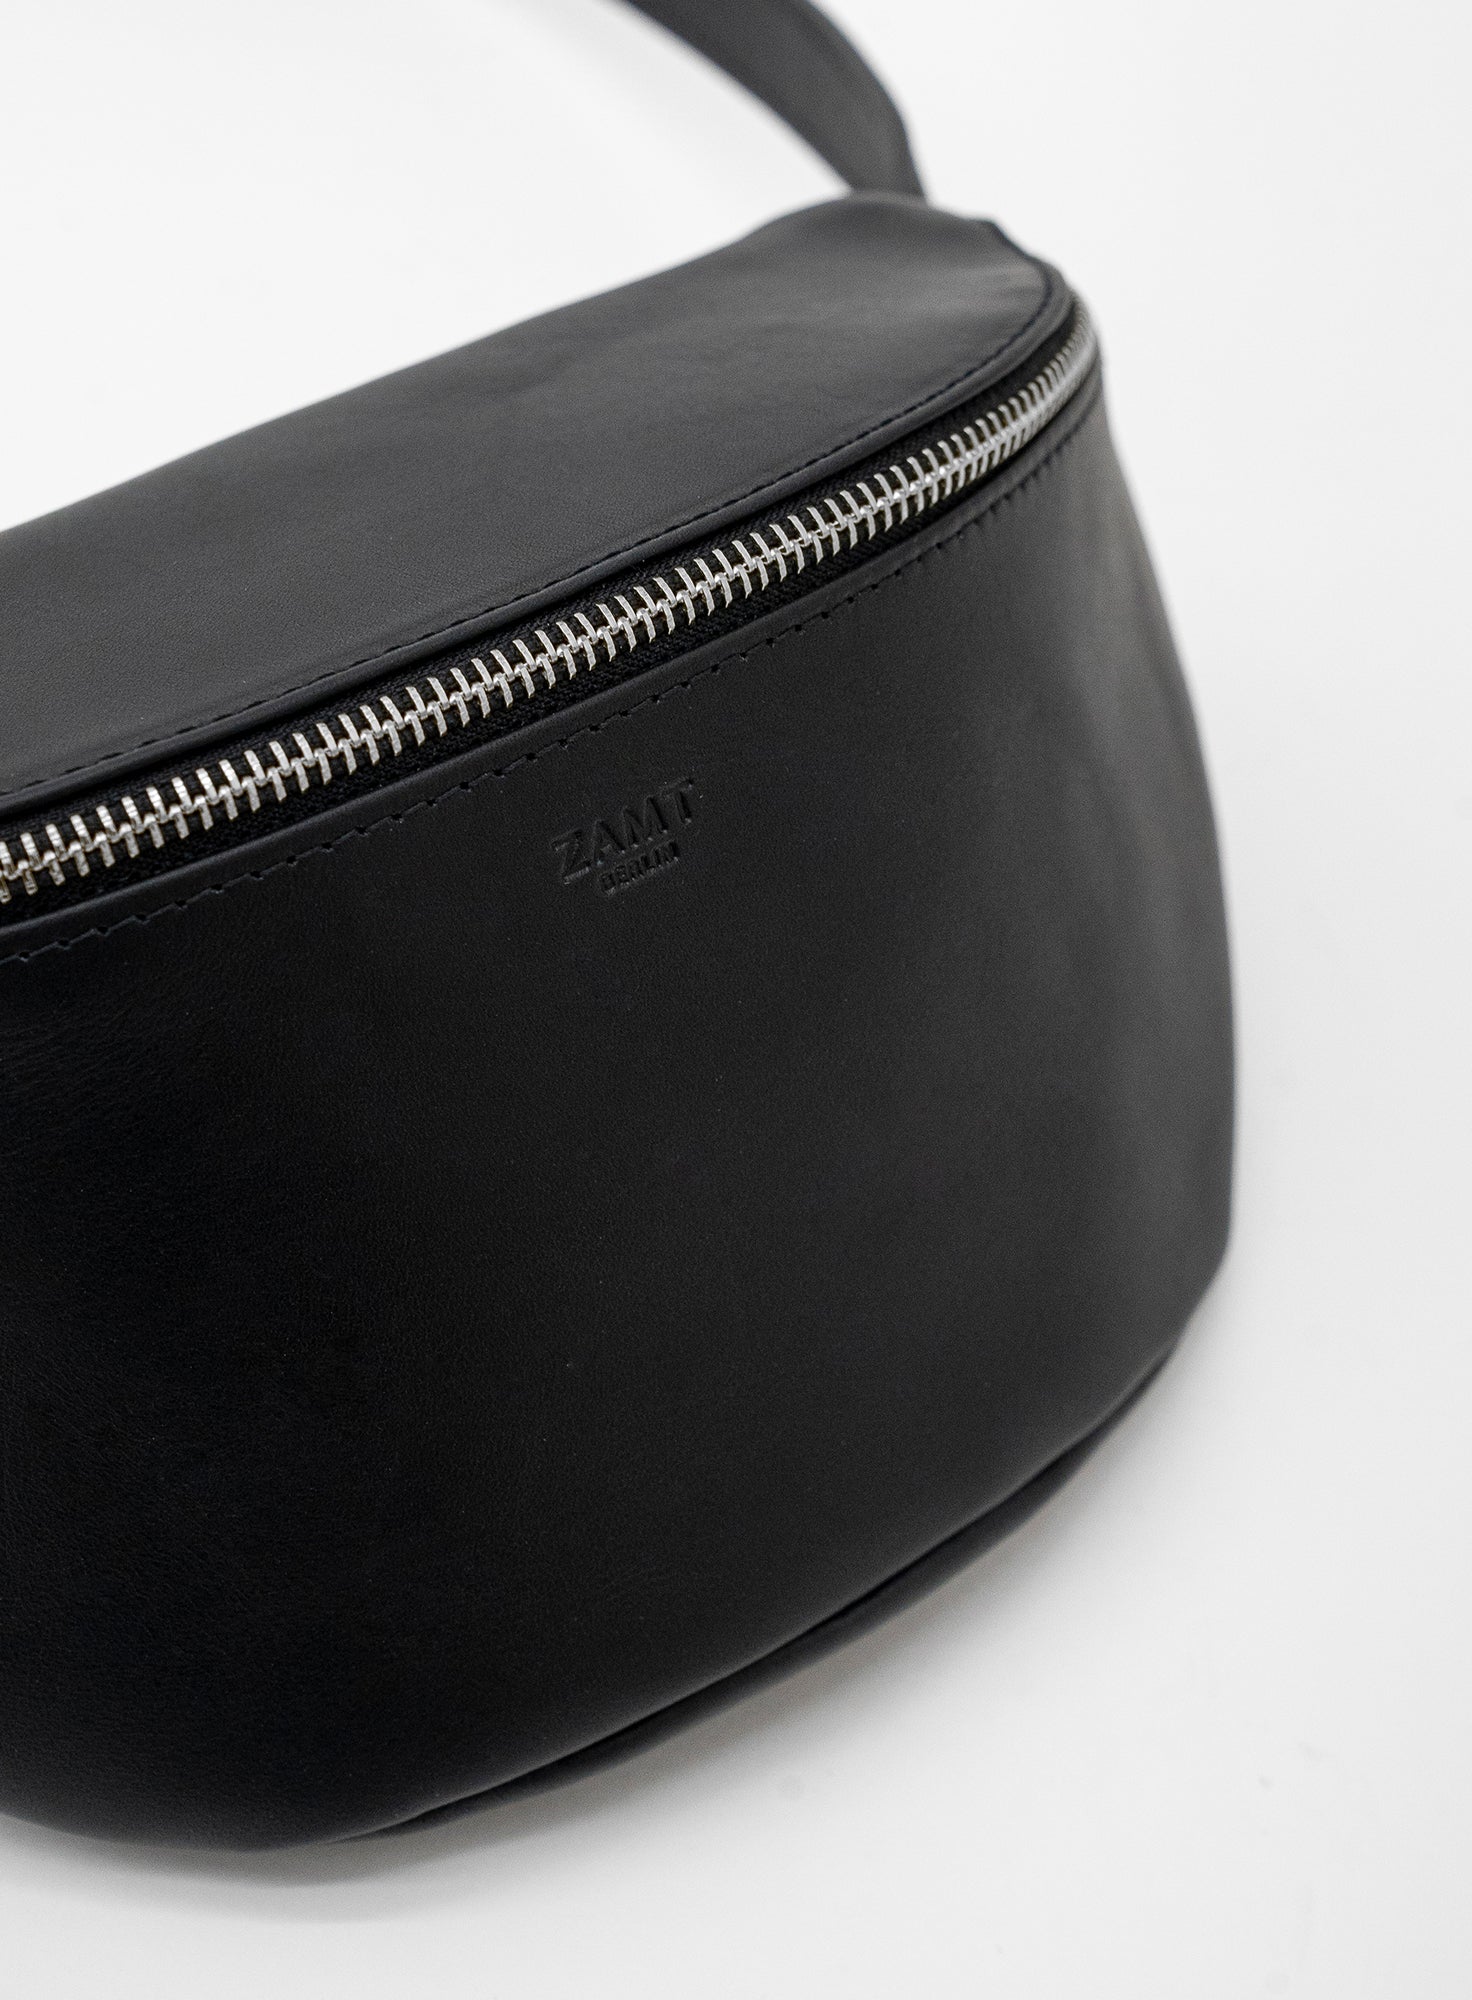 HIP_BAG_CAN_Black_Designed_in_Berlin_Made_to_last_Handmade_in_Poland.